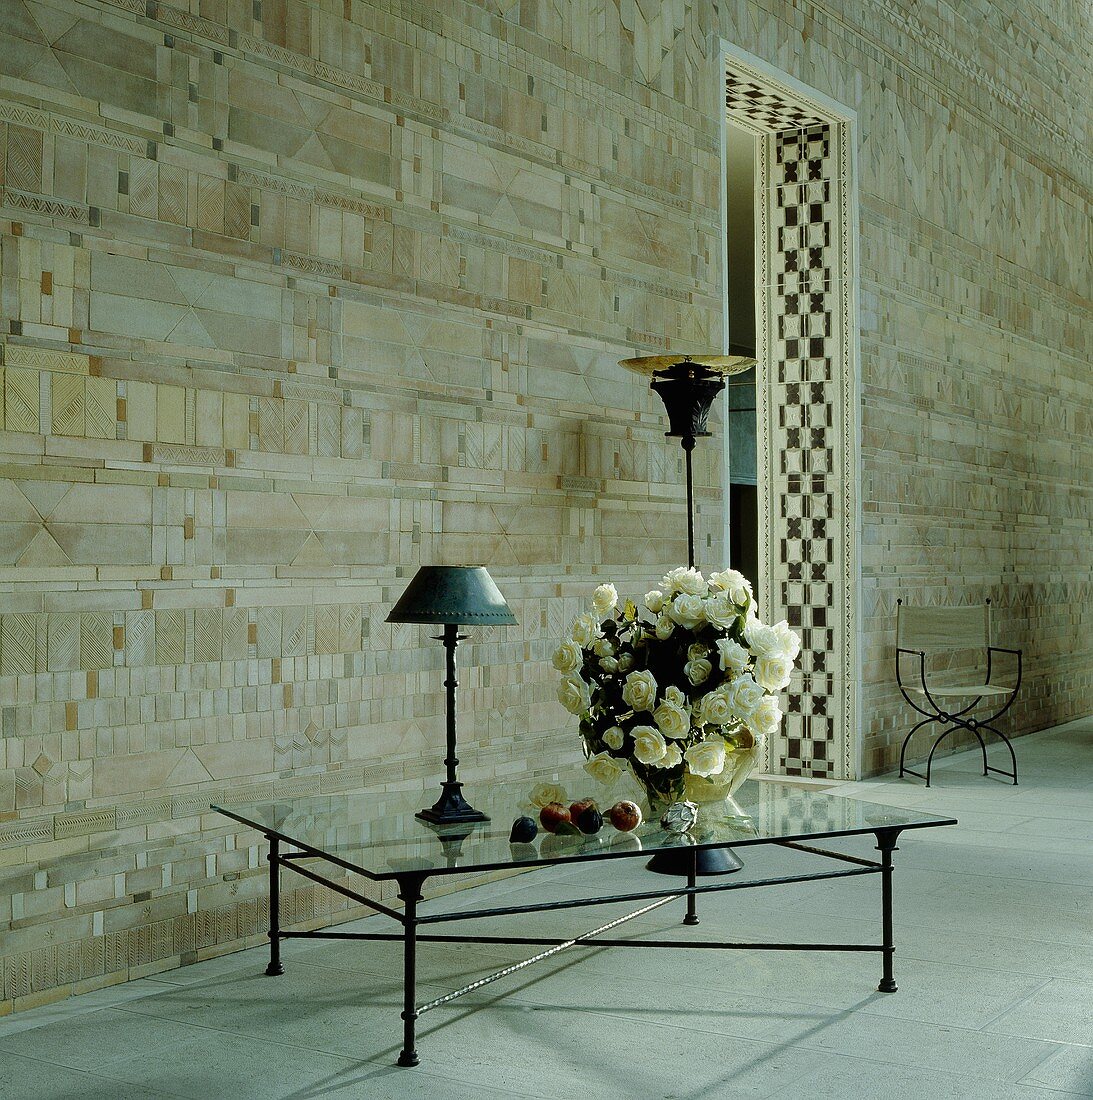 A tiled wall in a large entrance hall